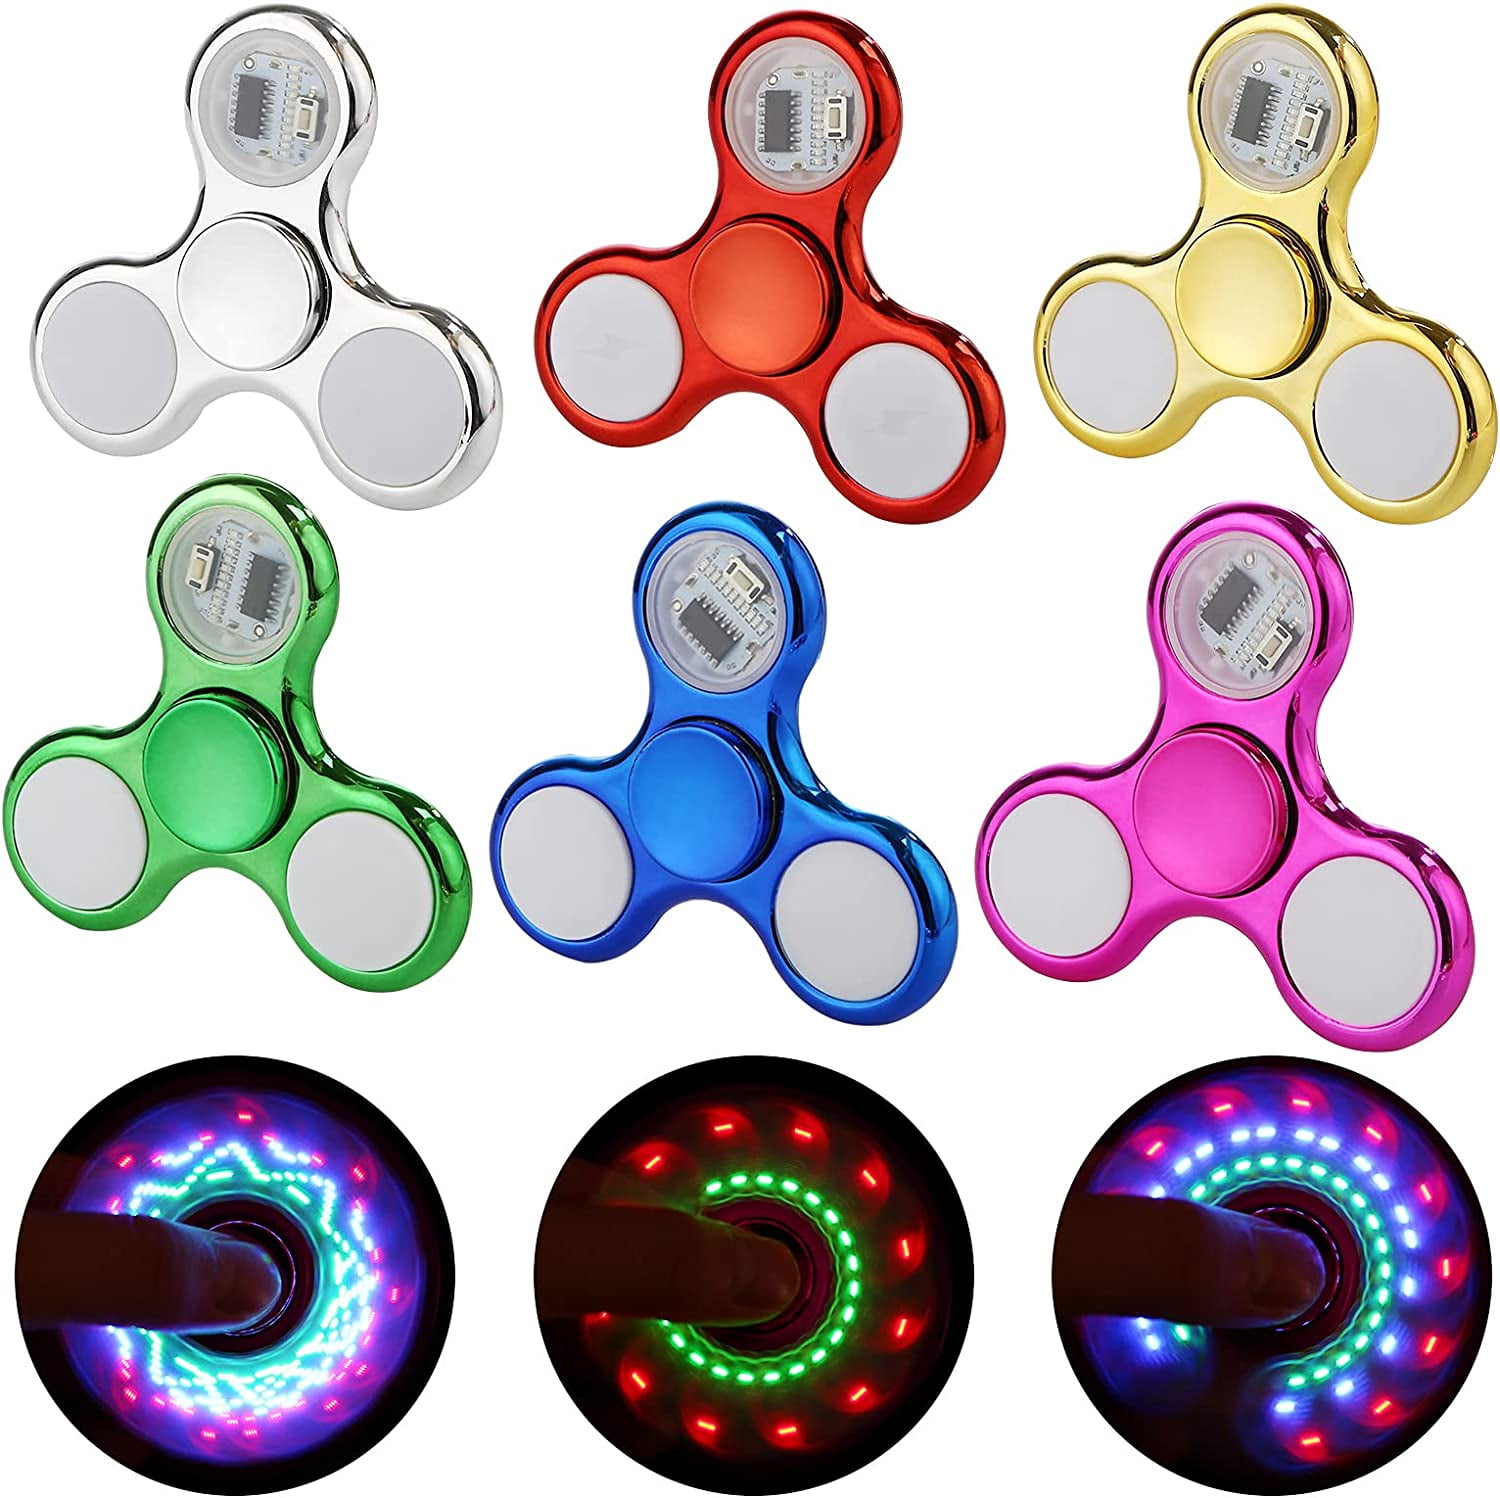 Spinners 6 Pack,Light up Fidget Toys,Hand Spinner Packs for Kids-ADHD Anxiety Toys Stress Relief Reducer - Walmart.com